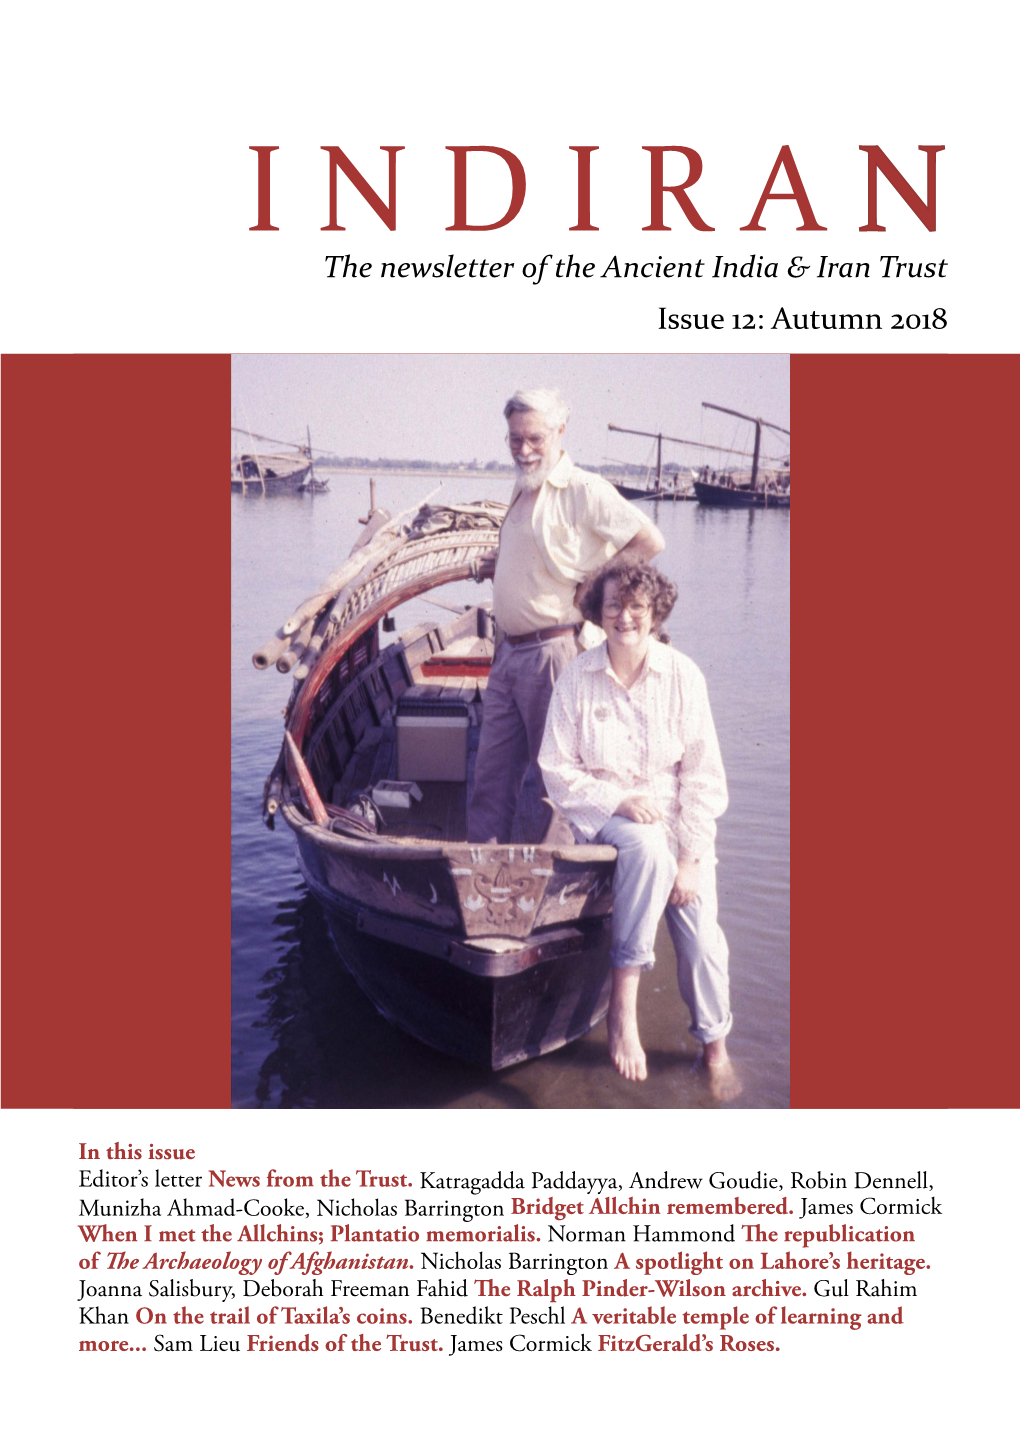 The Newsletter of the Ancient India & Iran Trust Issue 12: Autumn 2018